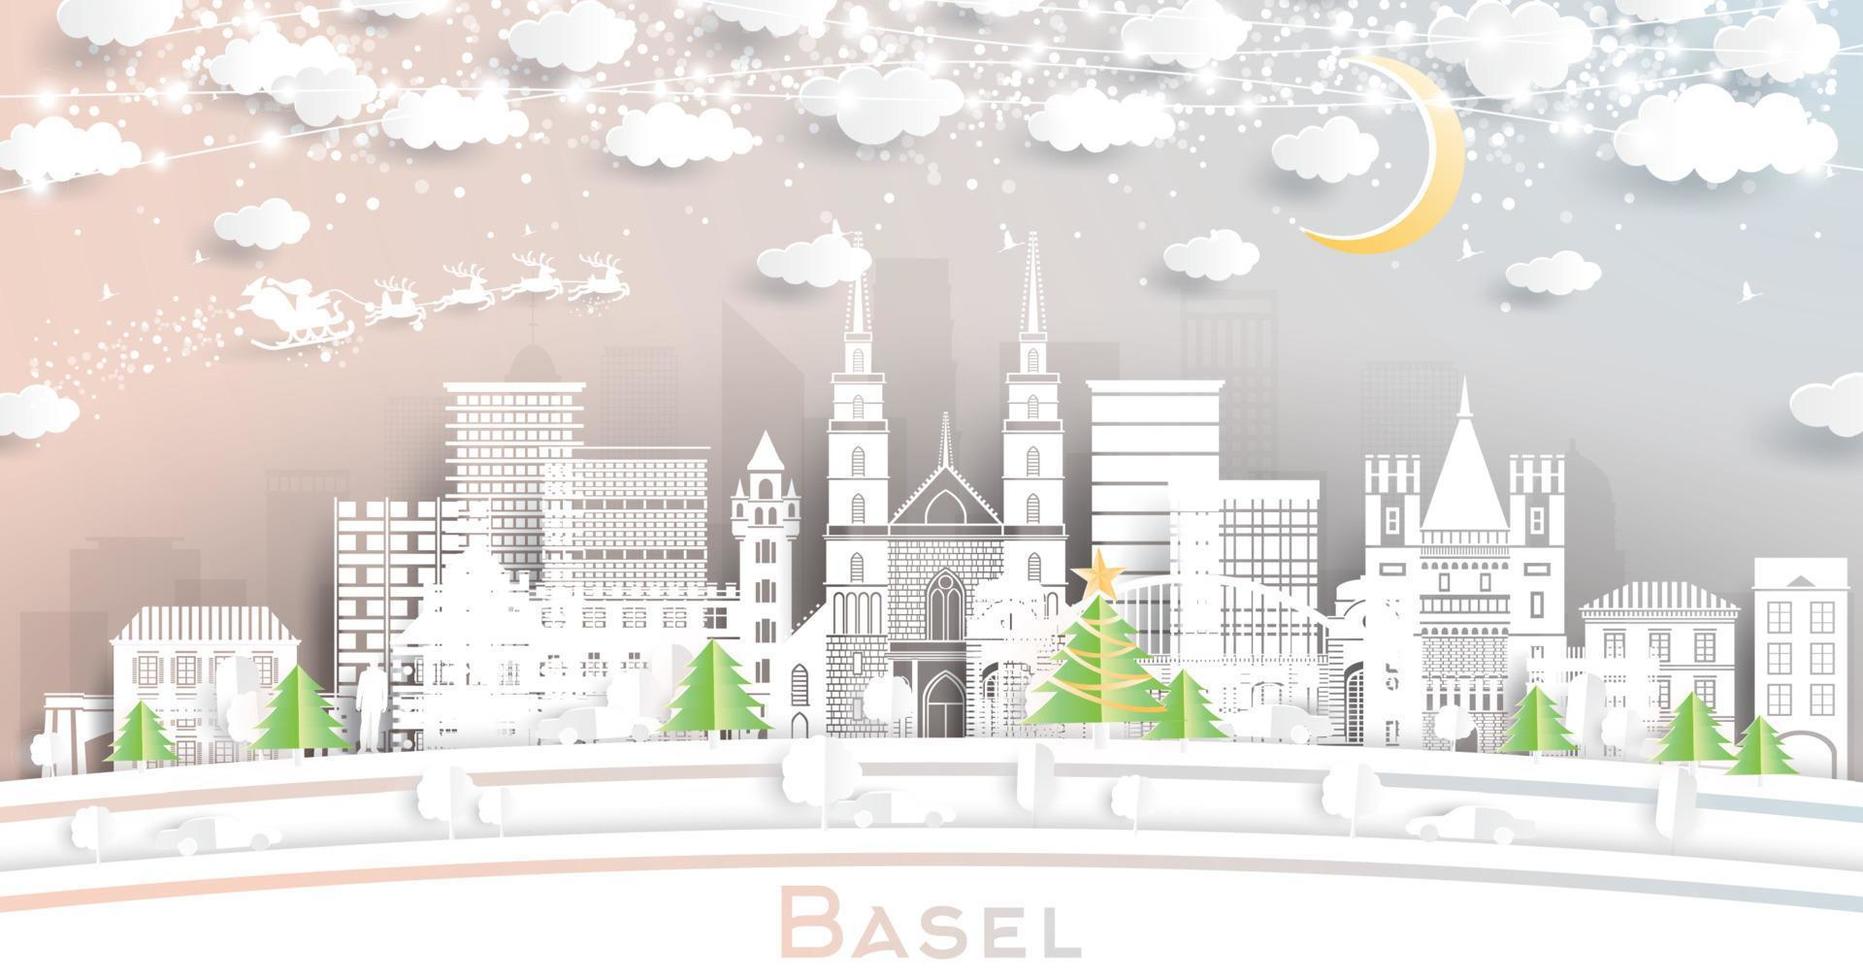 Basel Switzerland City Skyline in Paper Cut Style with Snowflakes, Moon and Neon Garland. vector